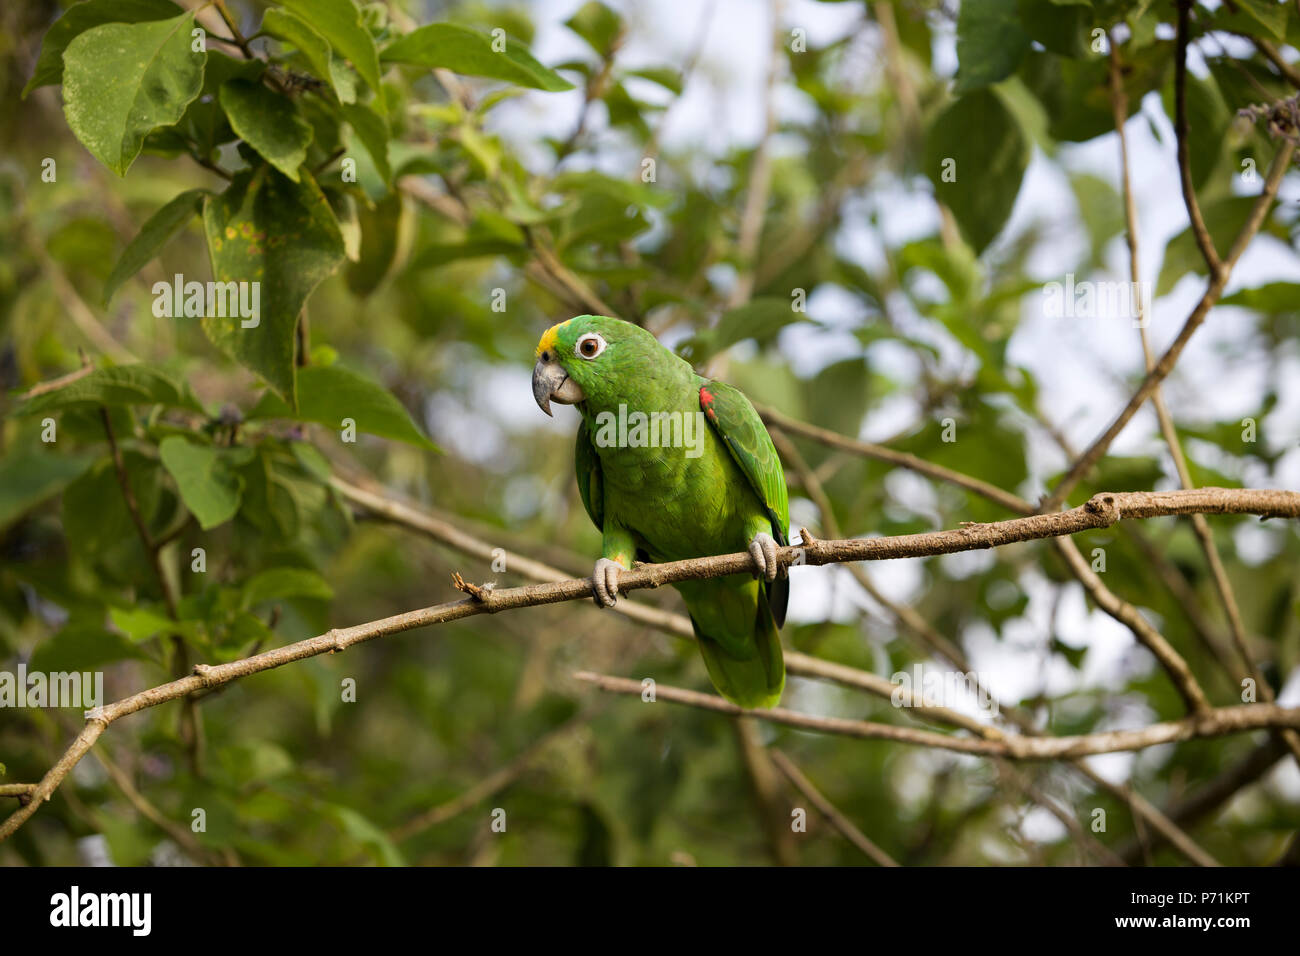 Beautiful green parrot bird in the forest habitat, sitting on the tree with green ...